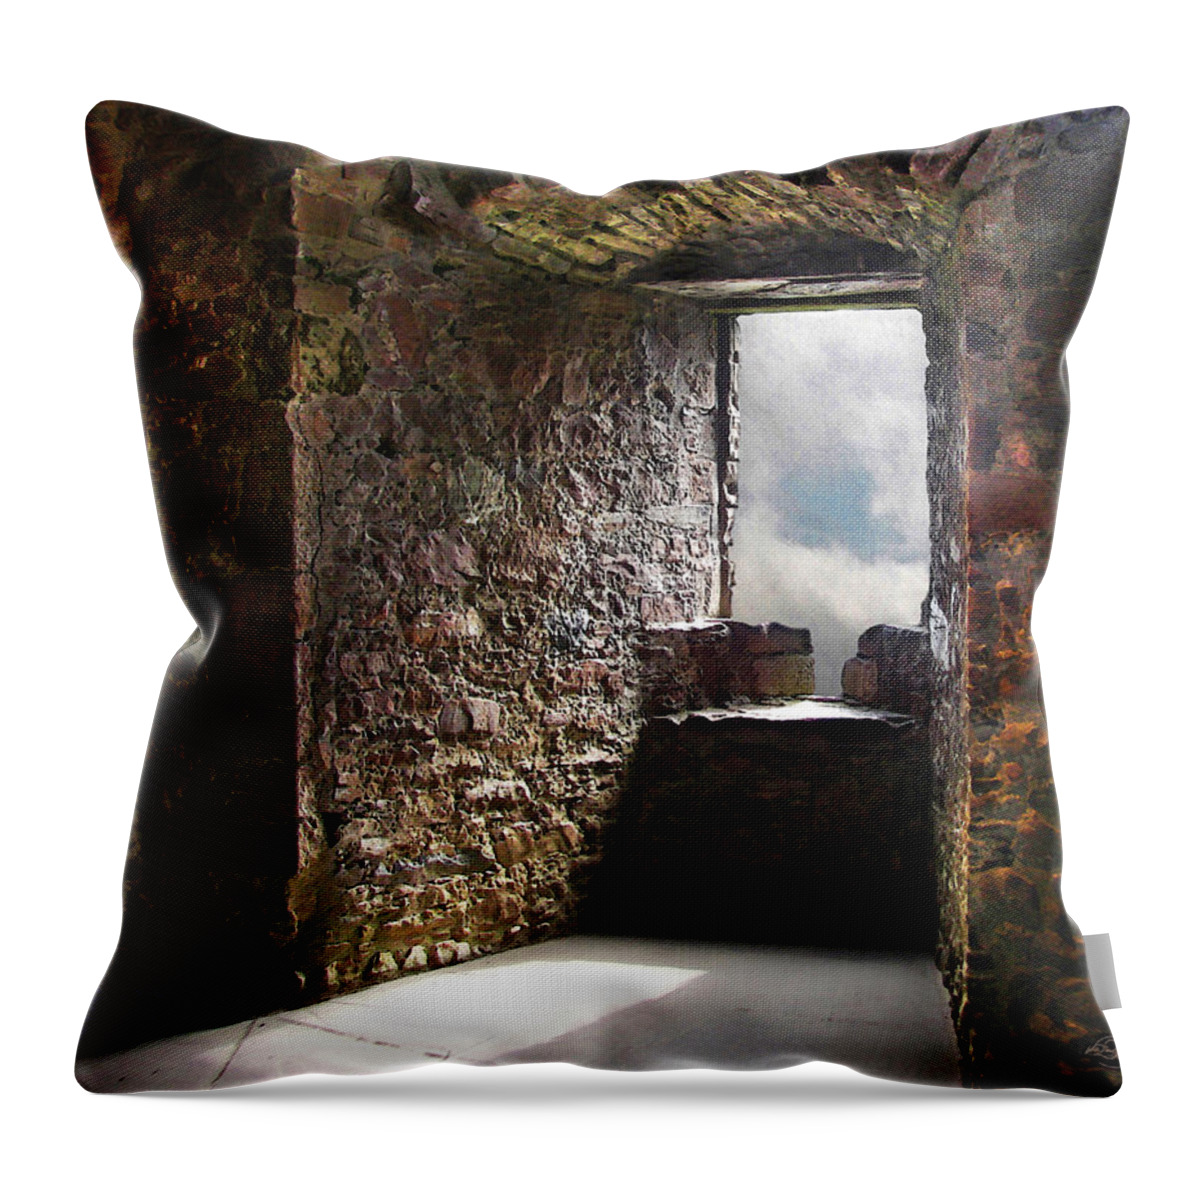 Castle Throw Pillow featuring the digital art View From A Lofty Tower by Vicki Lea Eggen